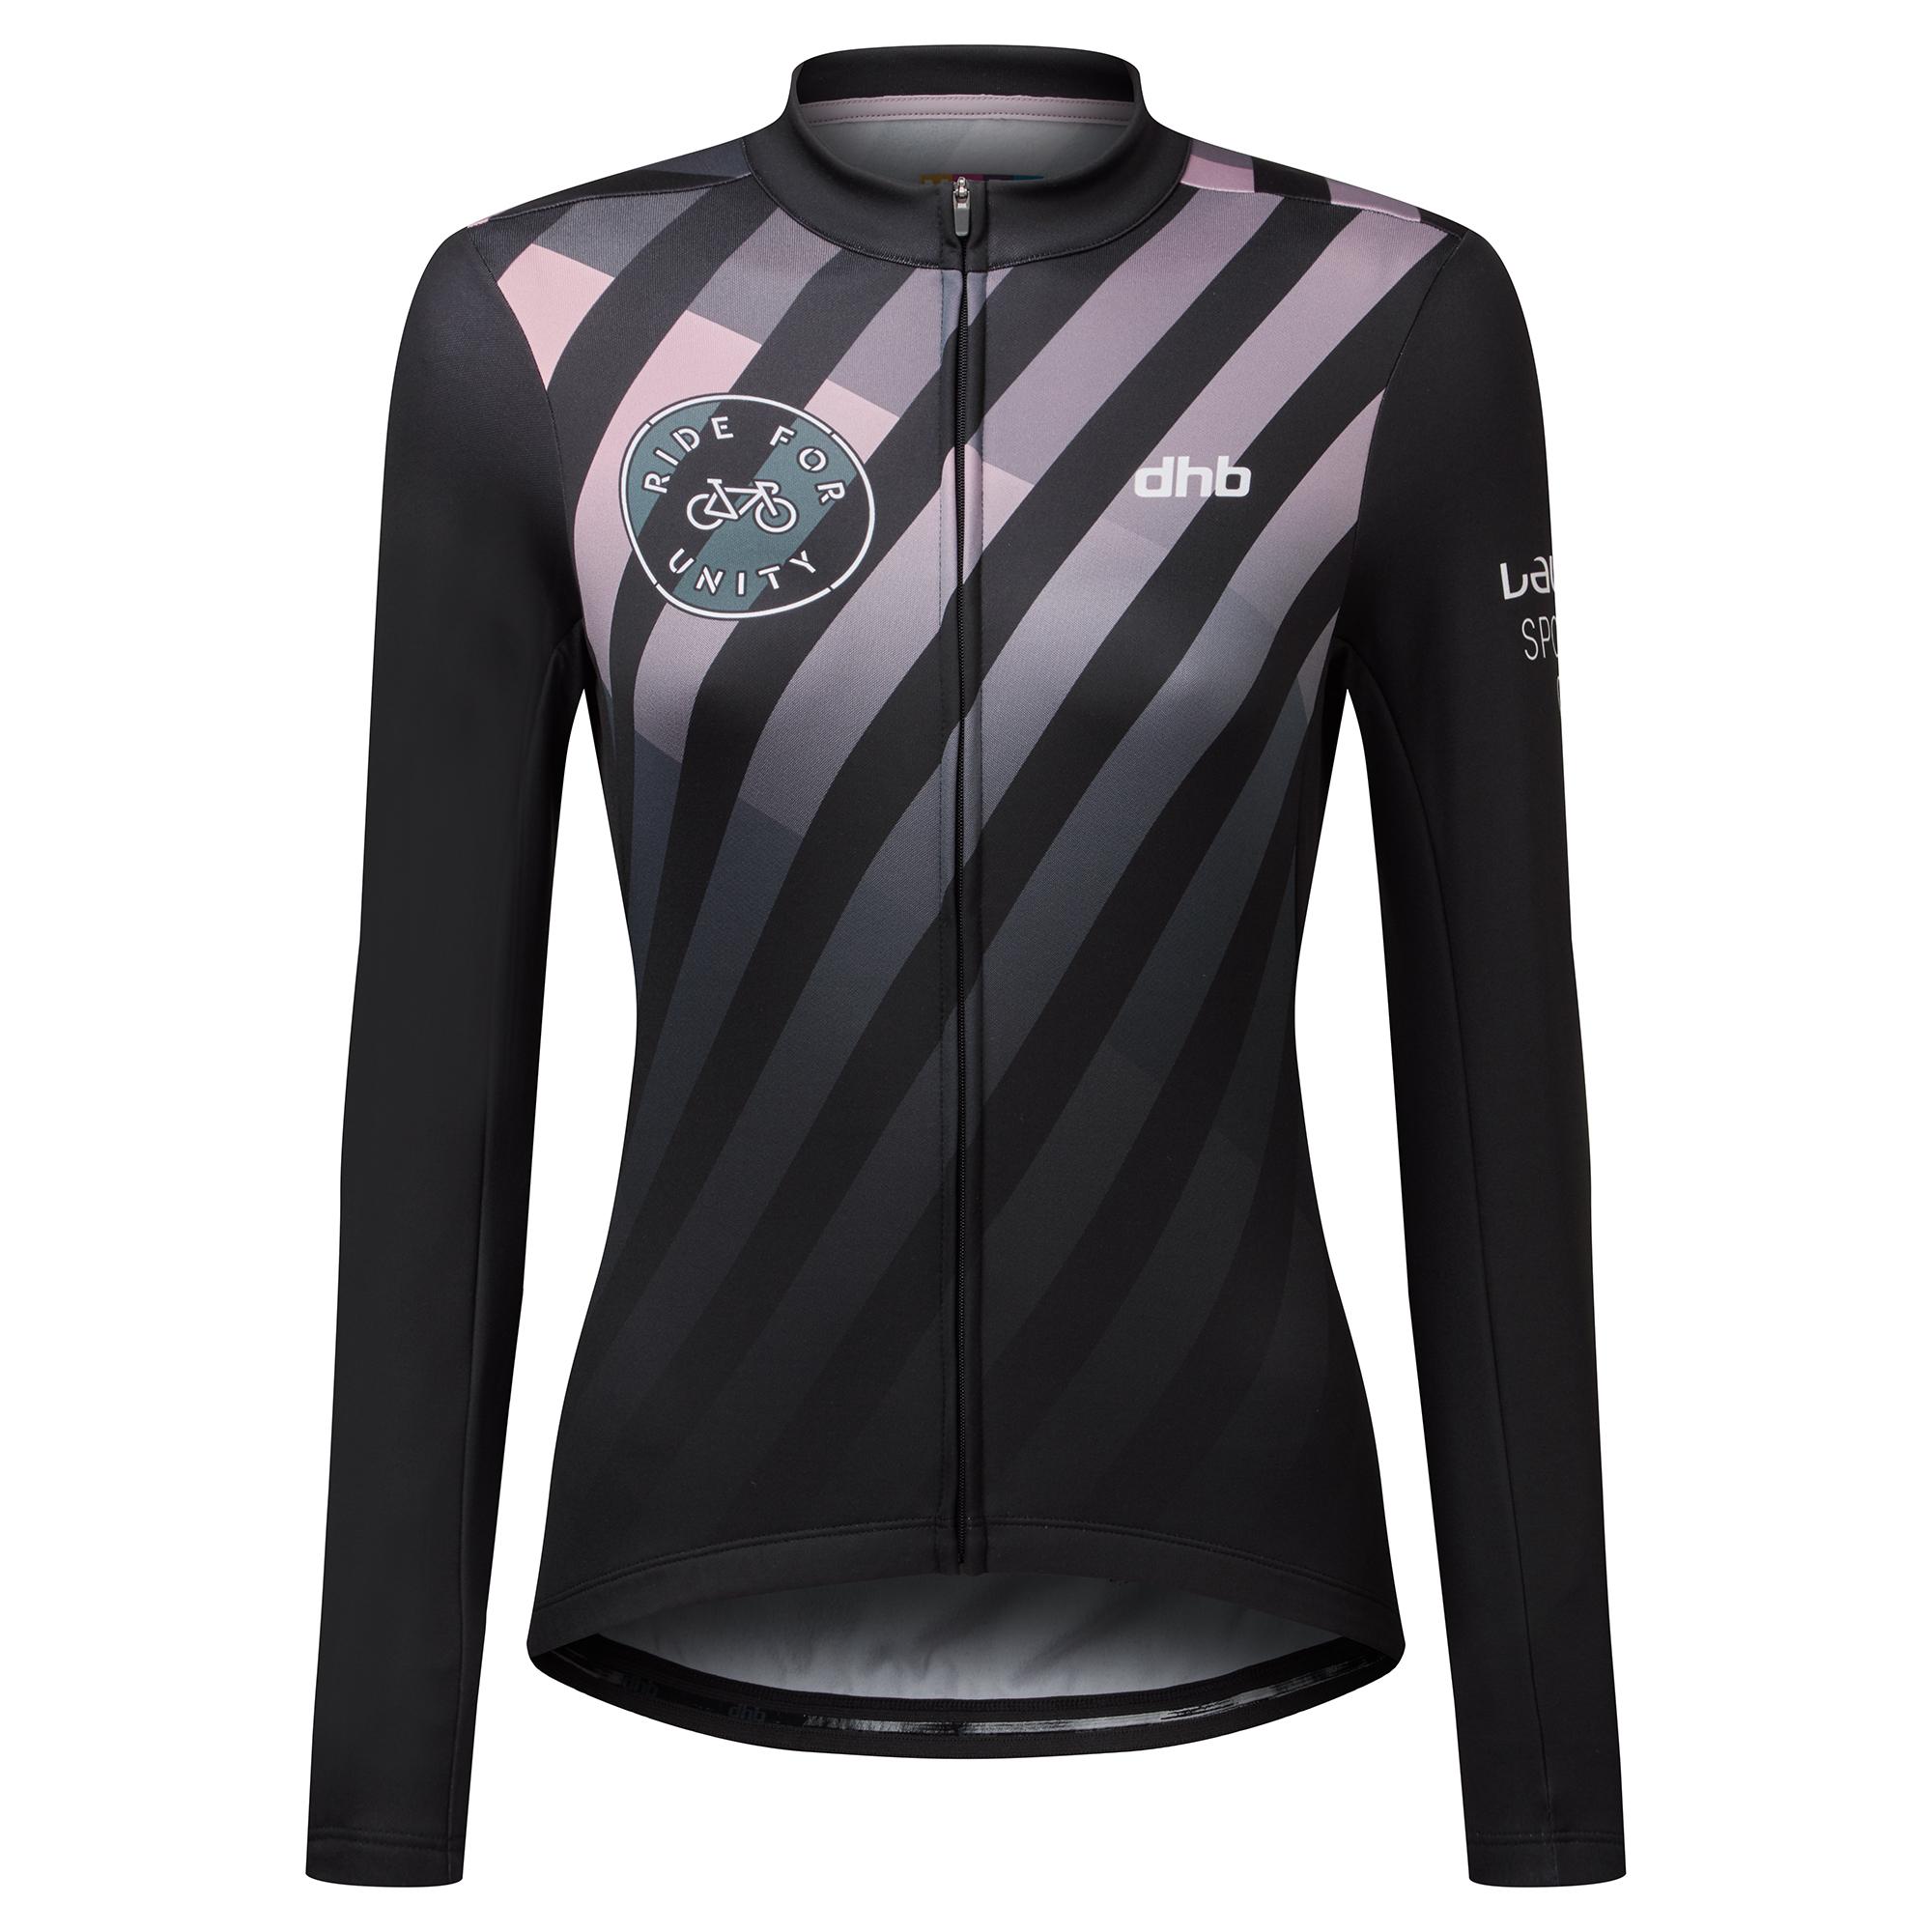 Dhb Ride For Unity Womens Long Sleeve Jersey - Black/pink